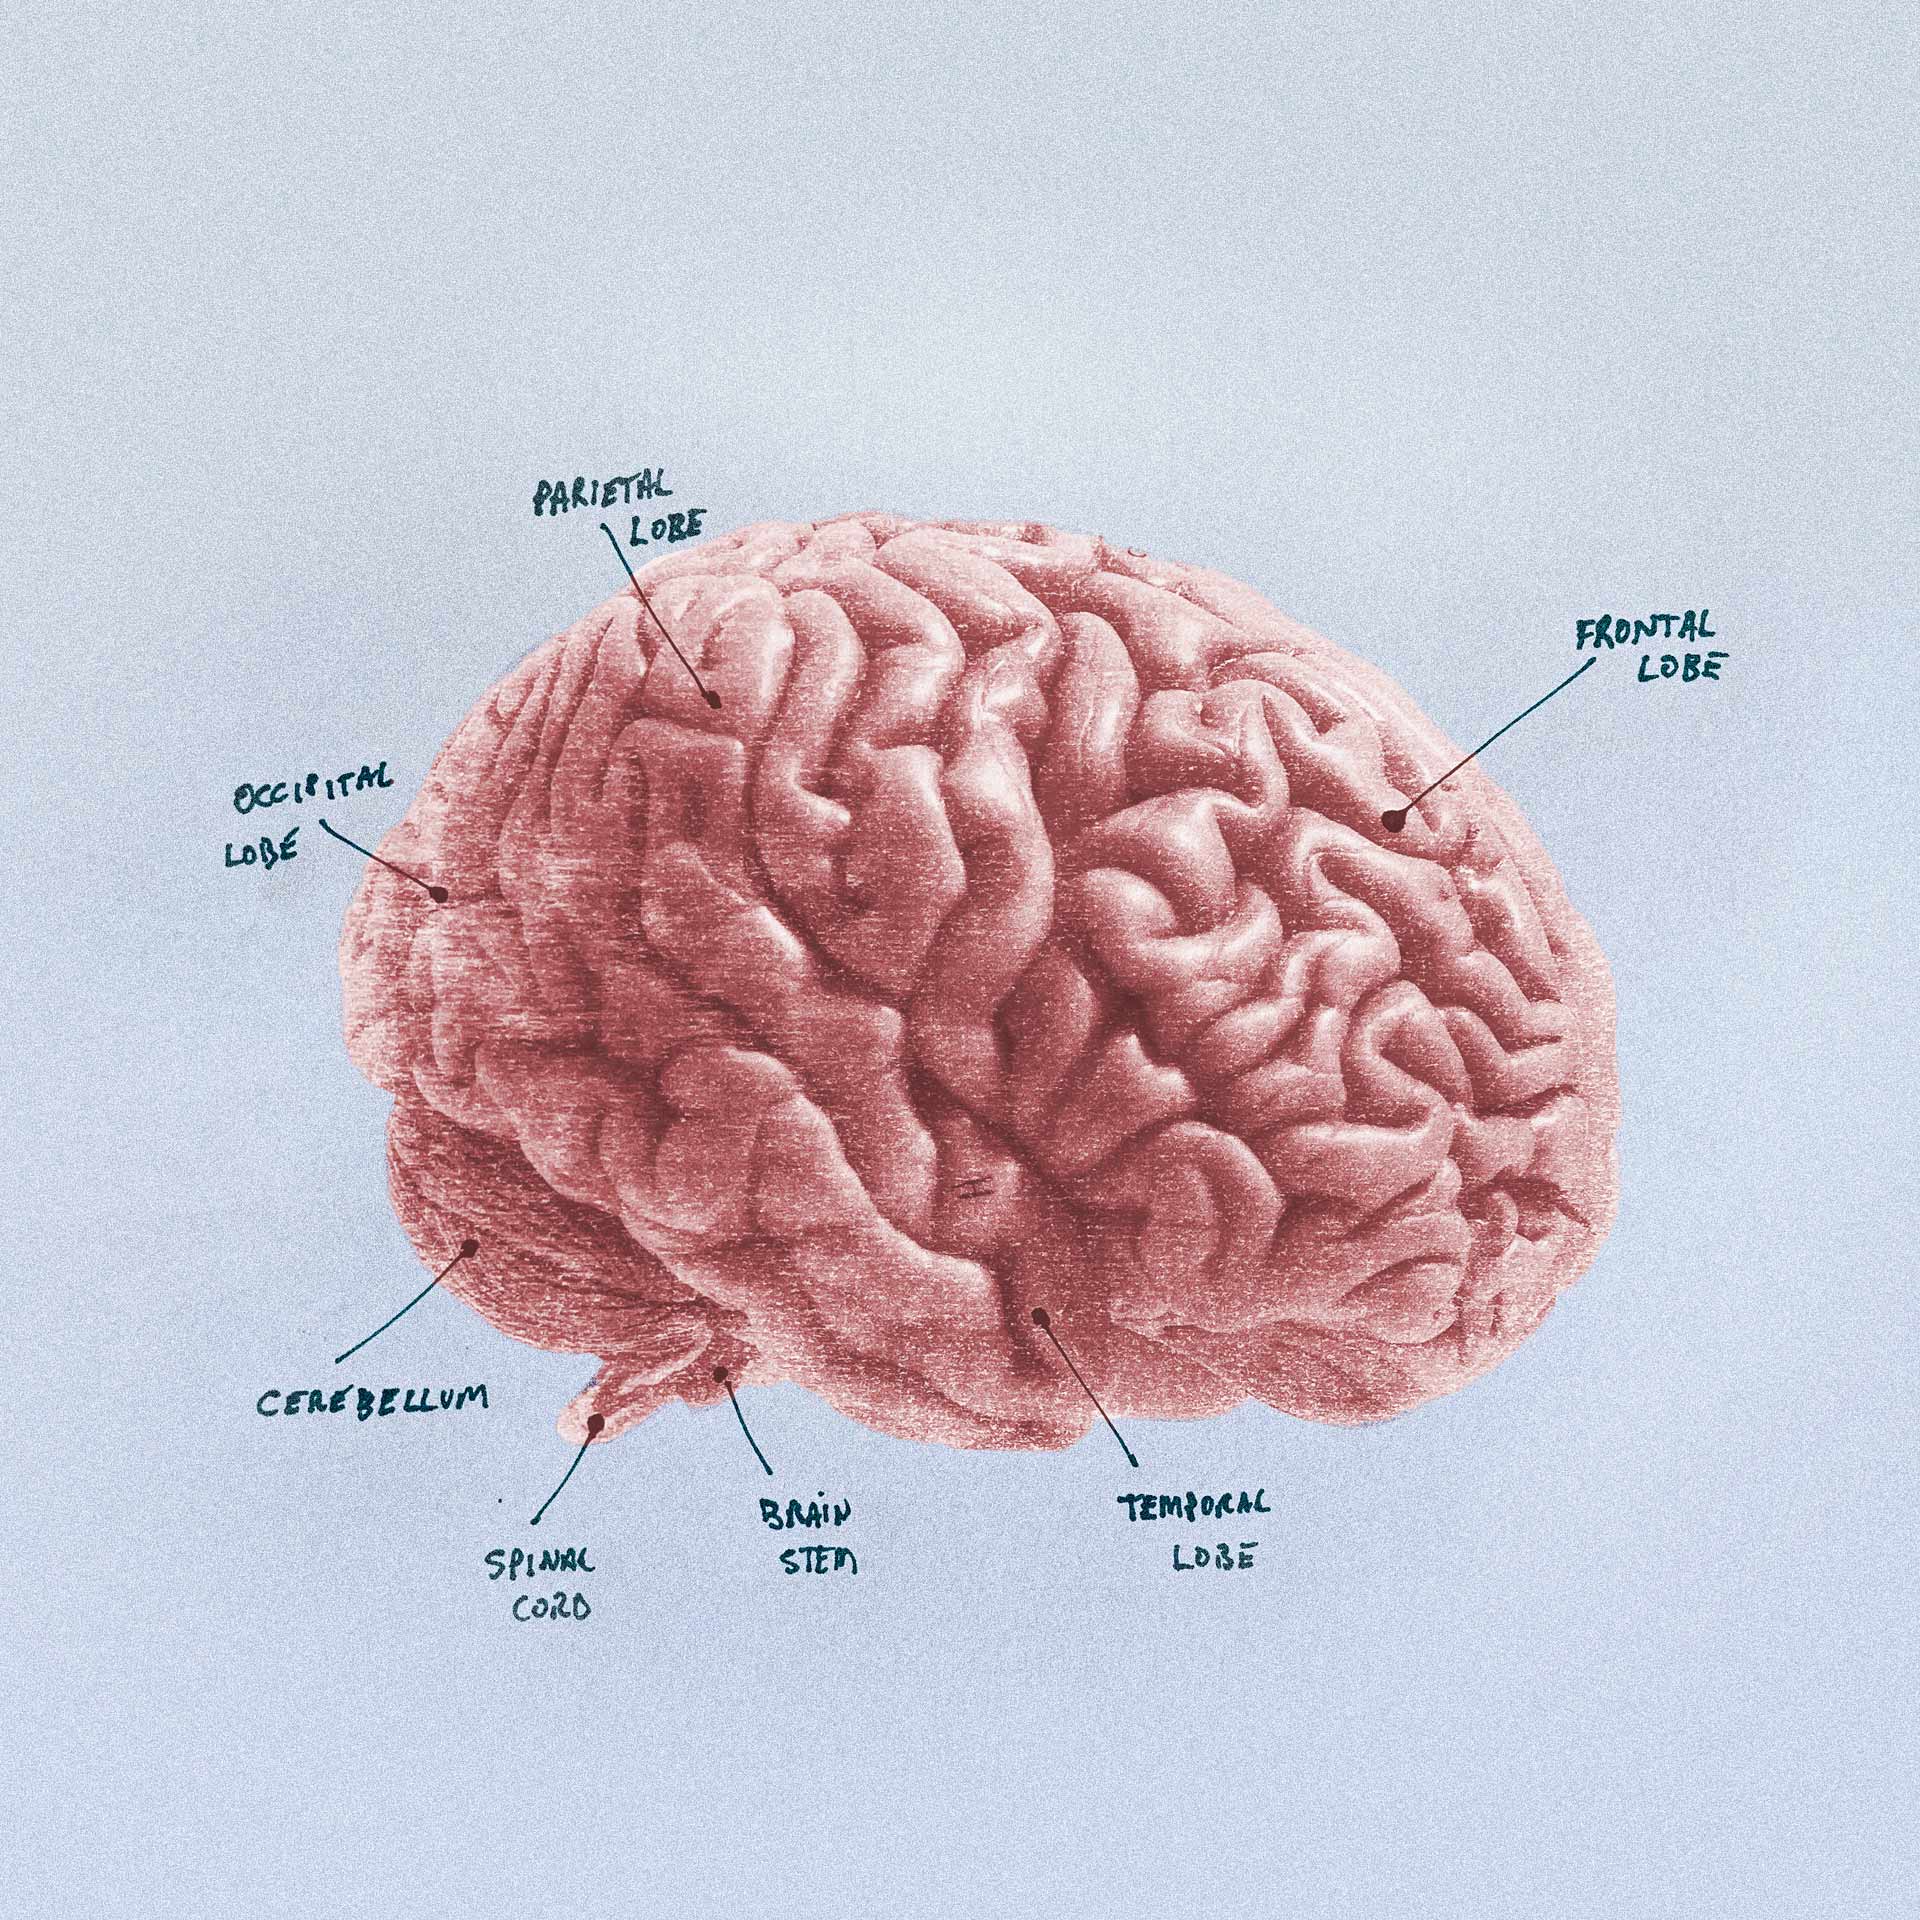 Annotated brain image